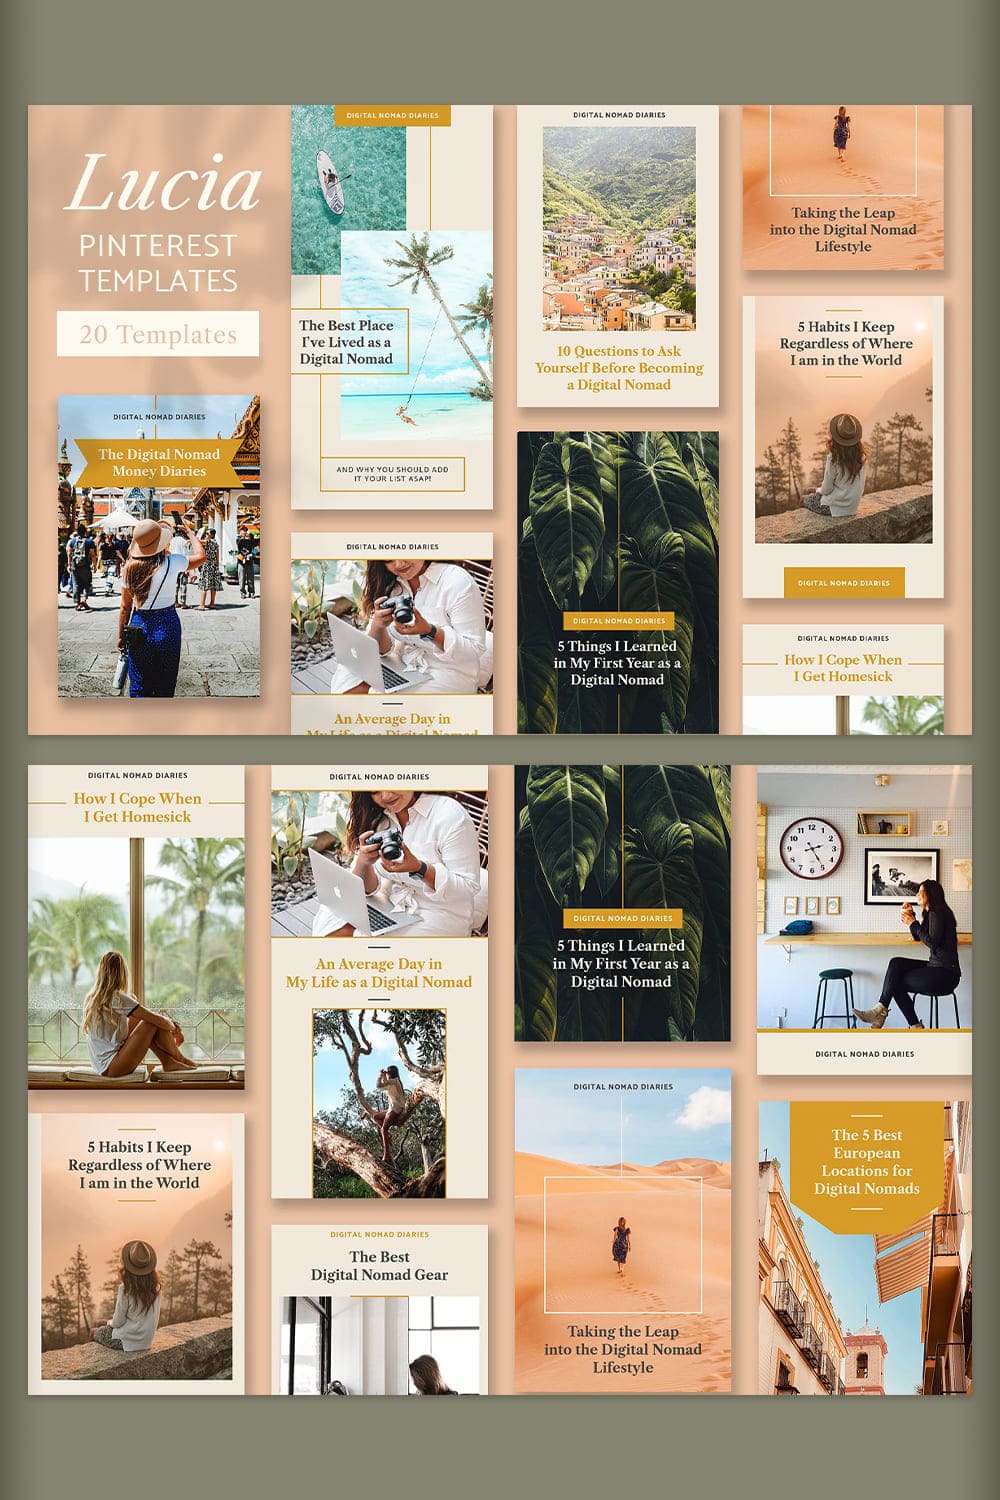 Lucia Pinterest Templates - "How I Cope When I Get Homesick".